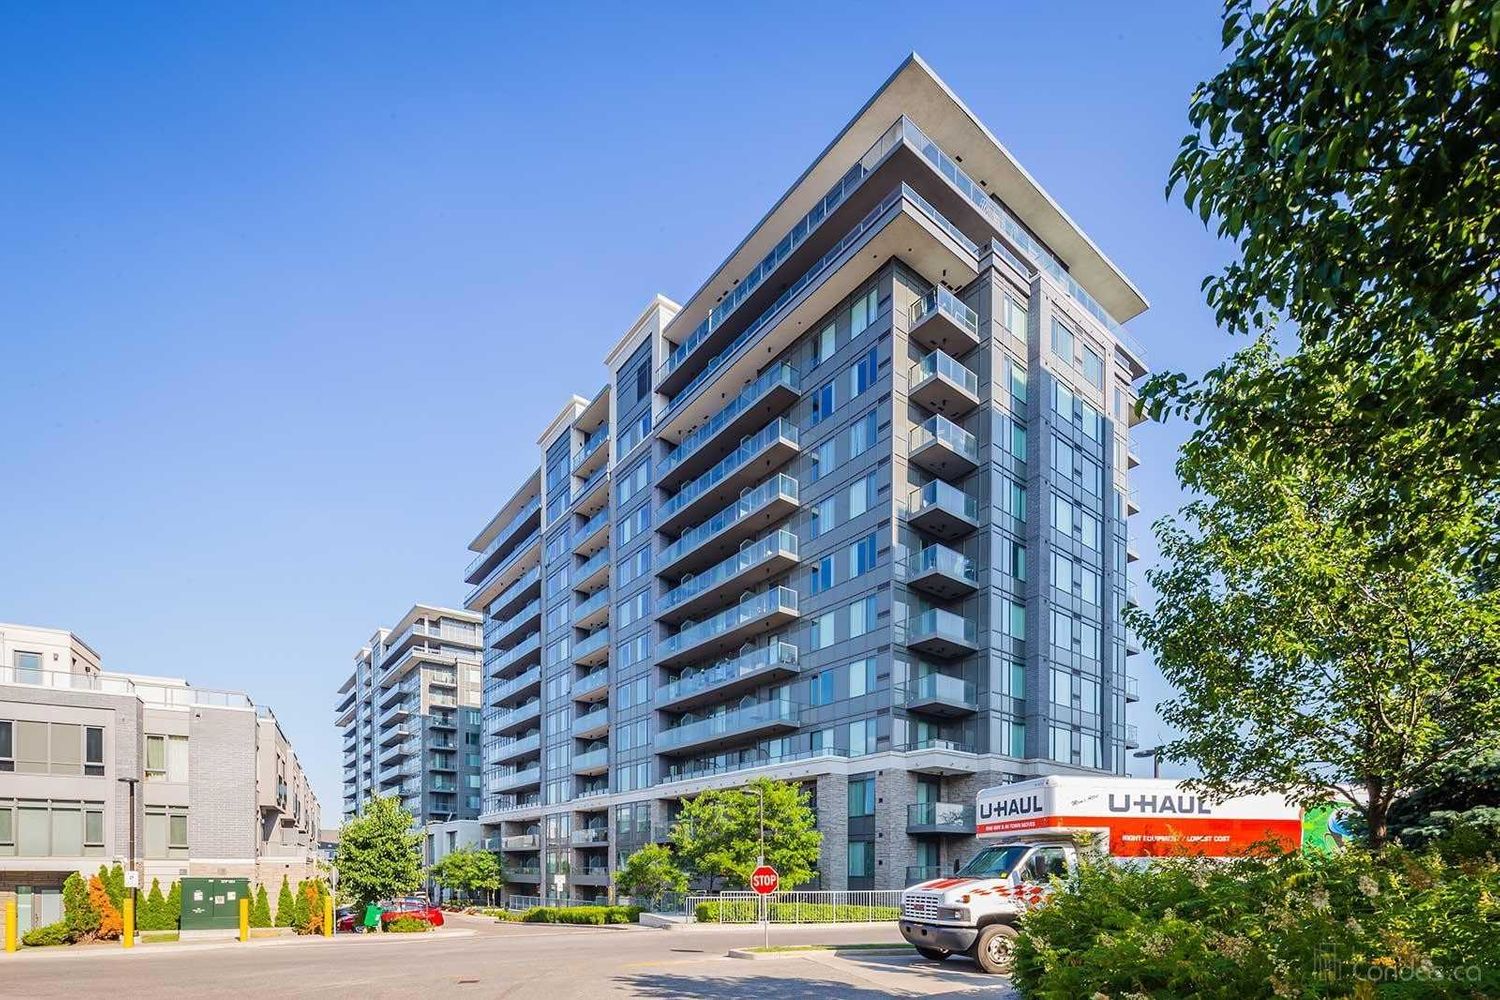 277-325 South Park Road. Eden Park II Condos is located in  Markham, Toronto - image #1 of 2